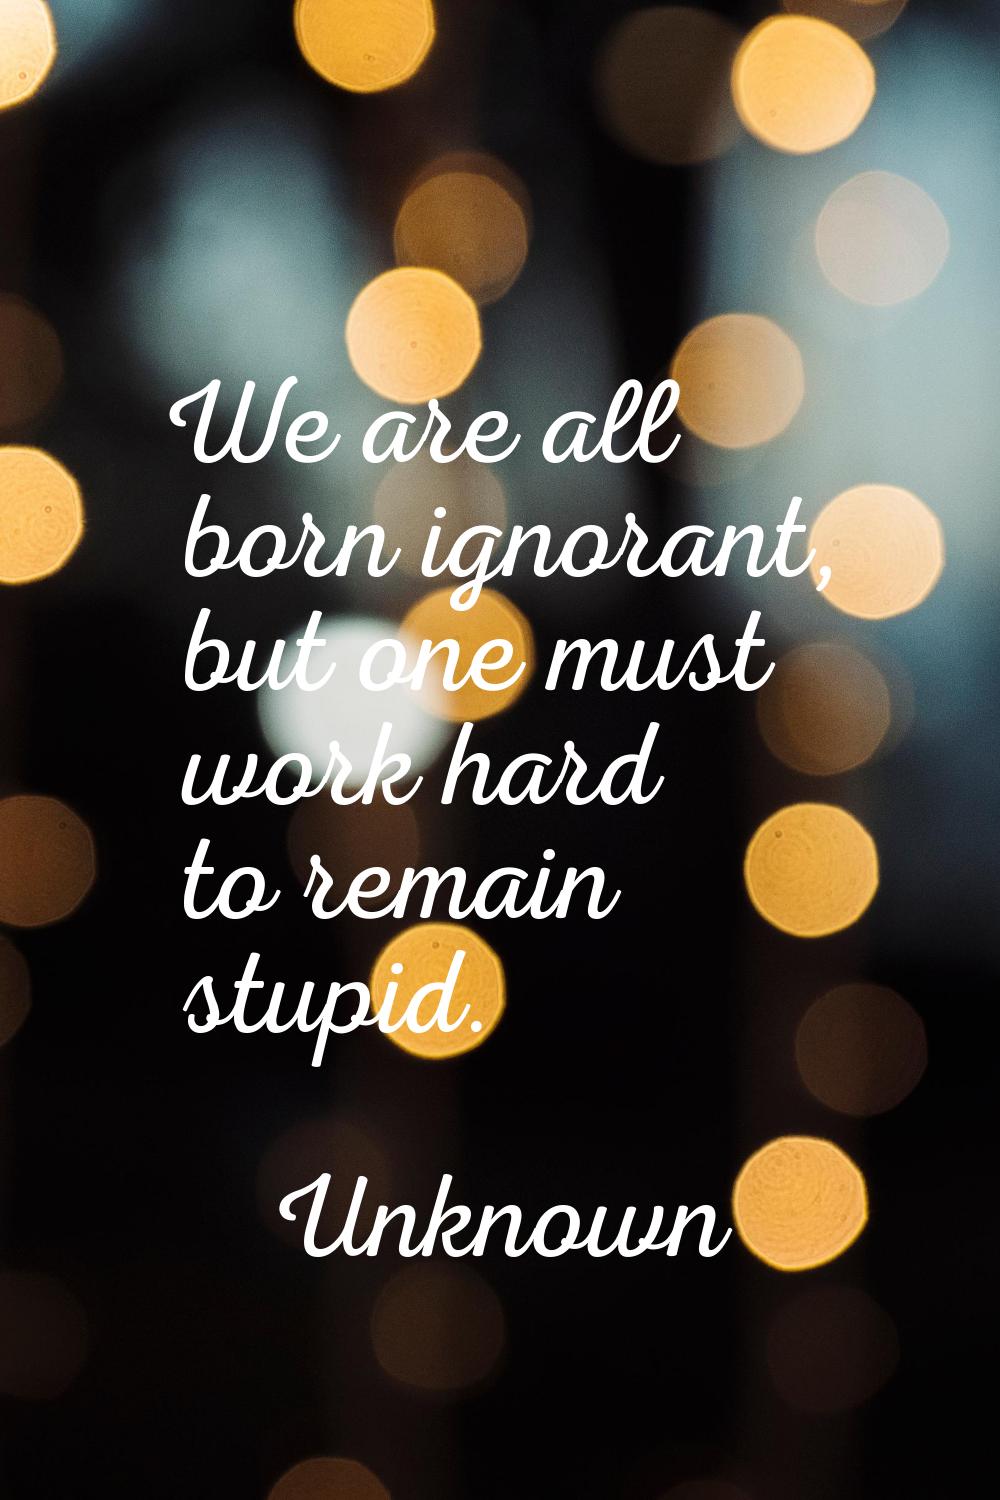 We are all born ignorant, but one must work hard to remain stupid.